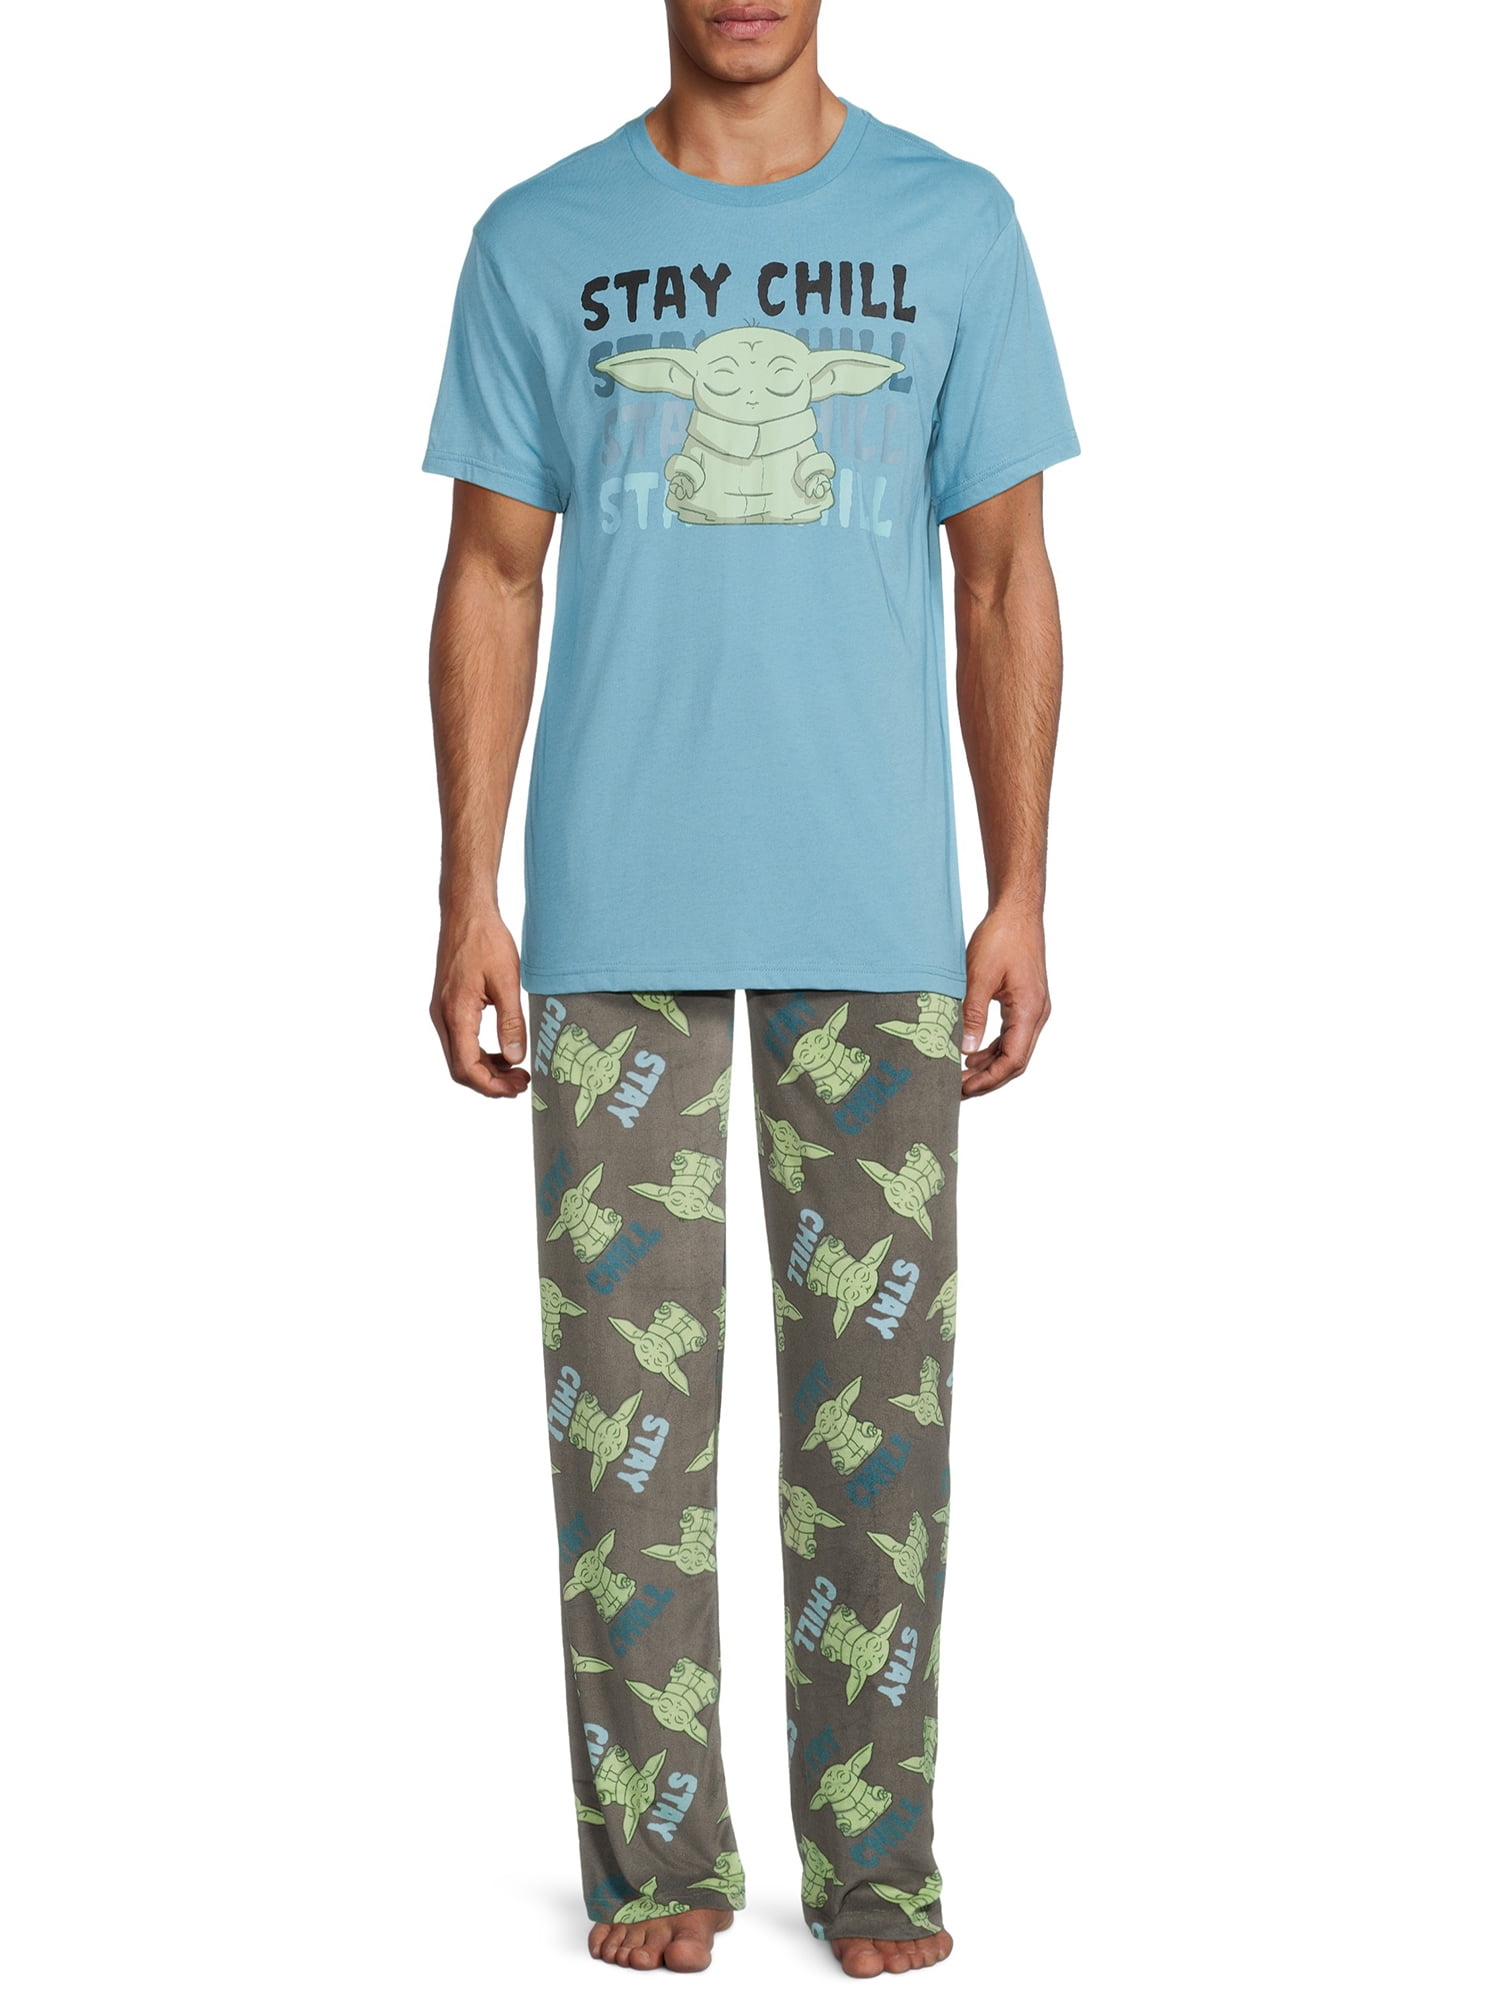 Boys All I Care About is Gaming Blue Camouflage Pyjamas 